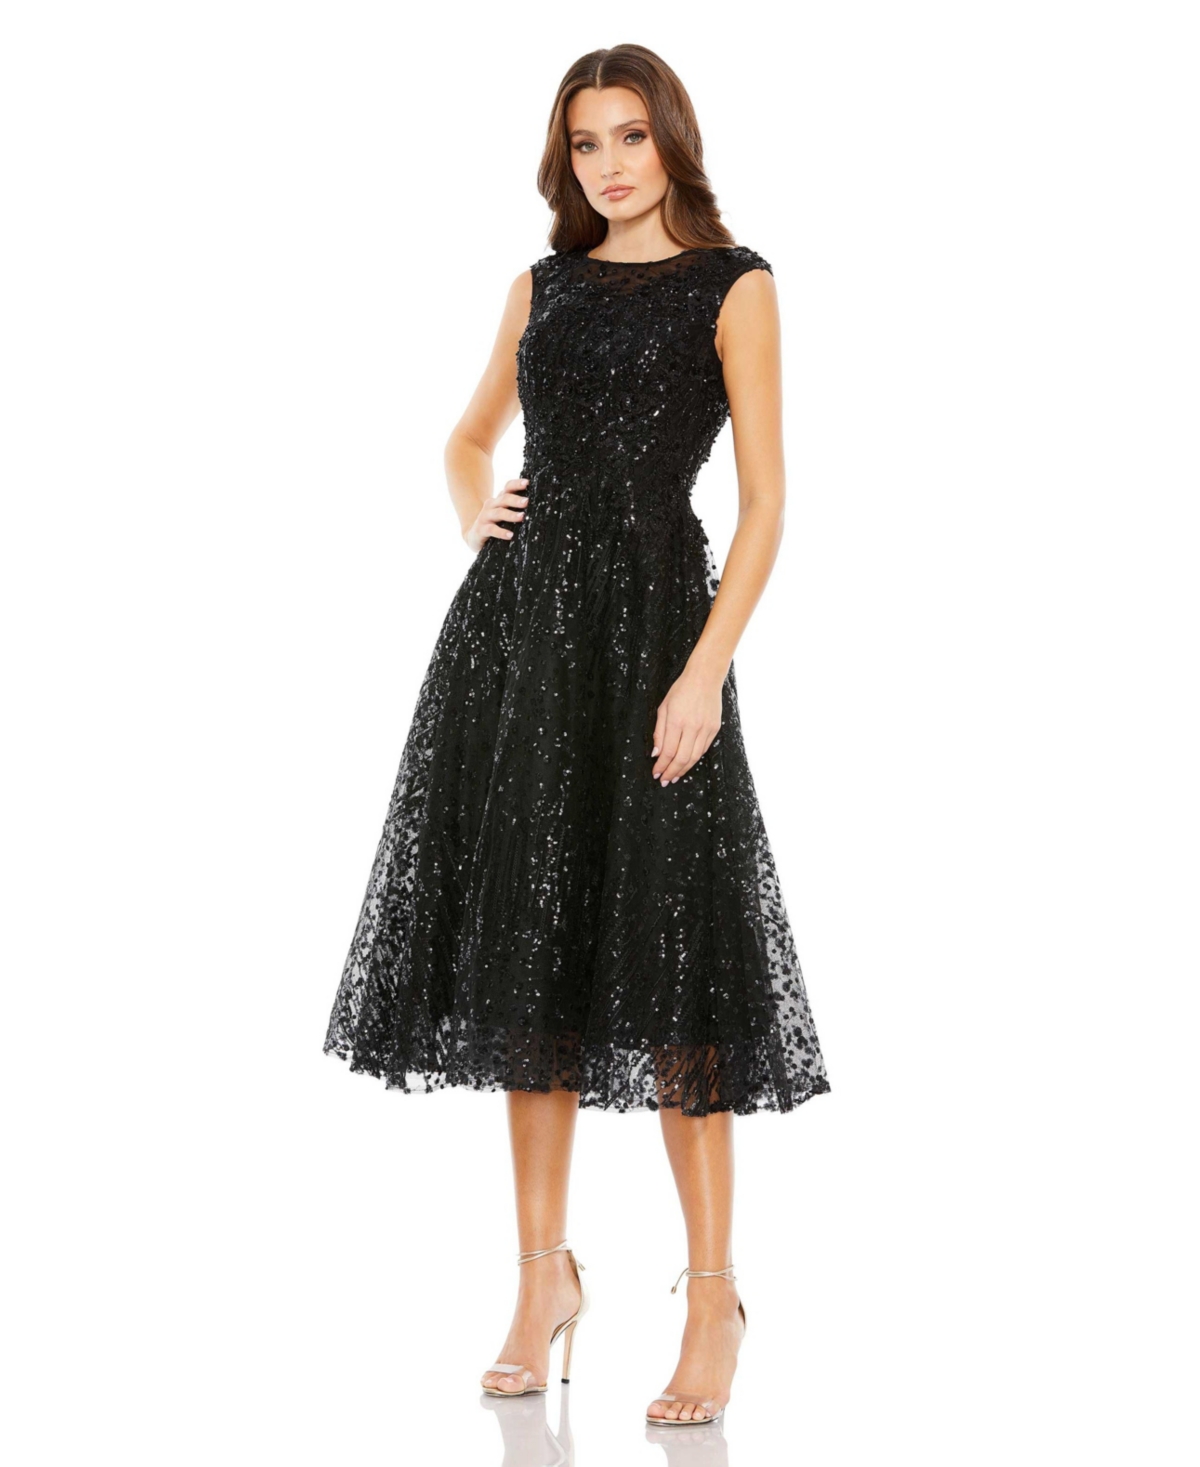 Women's Sequined Cap Sleeve Fit And Flare Dress - Black